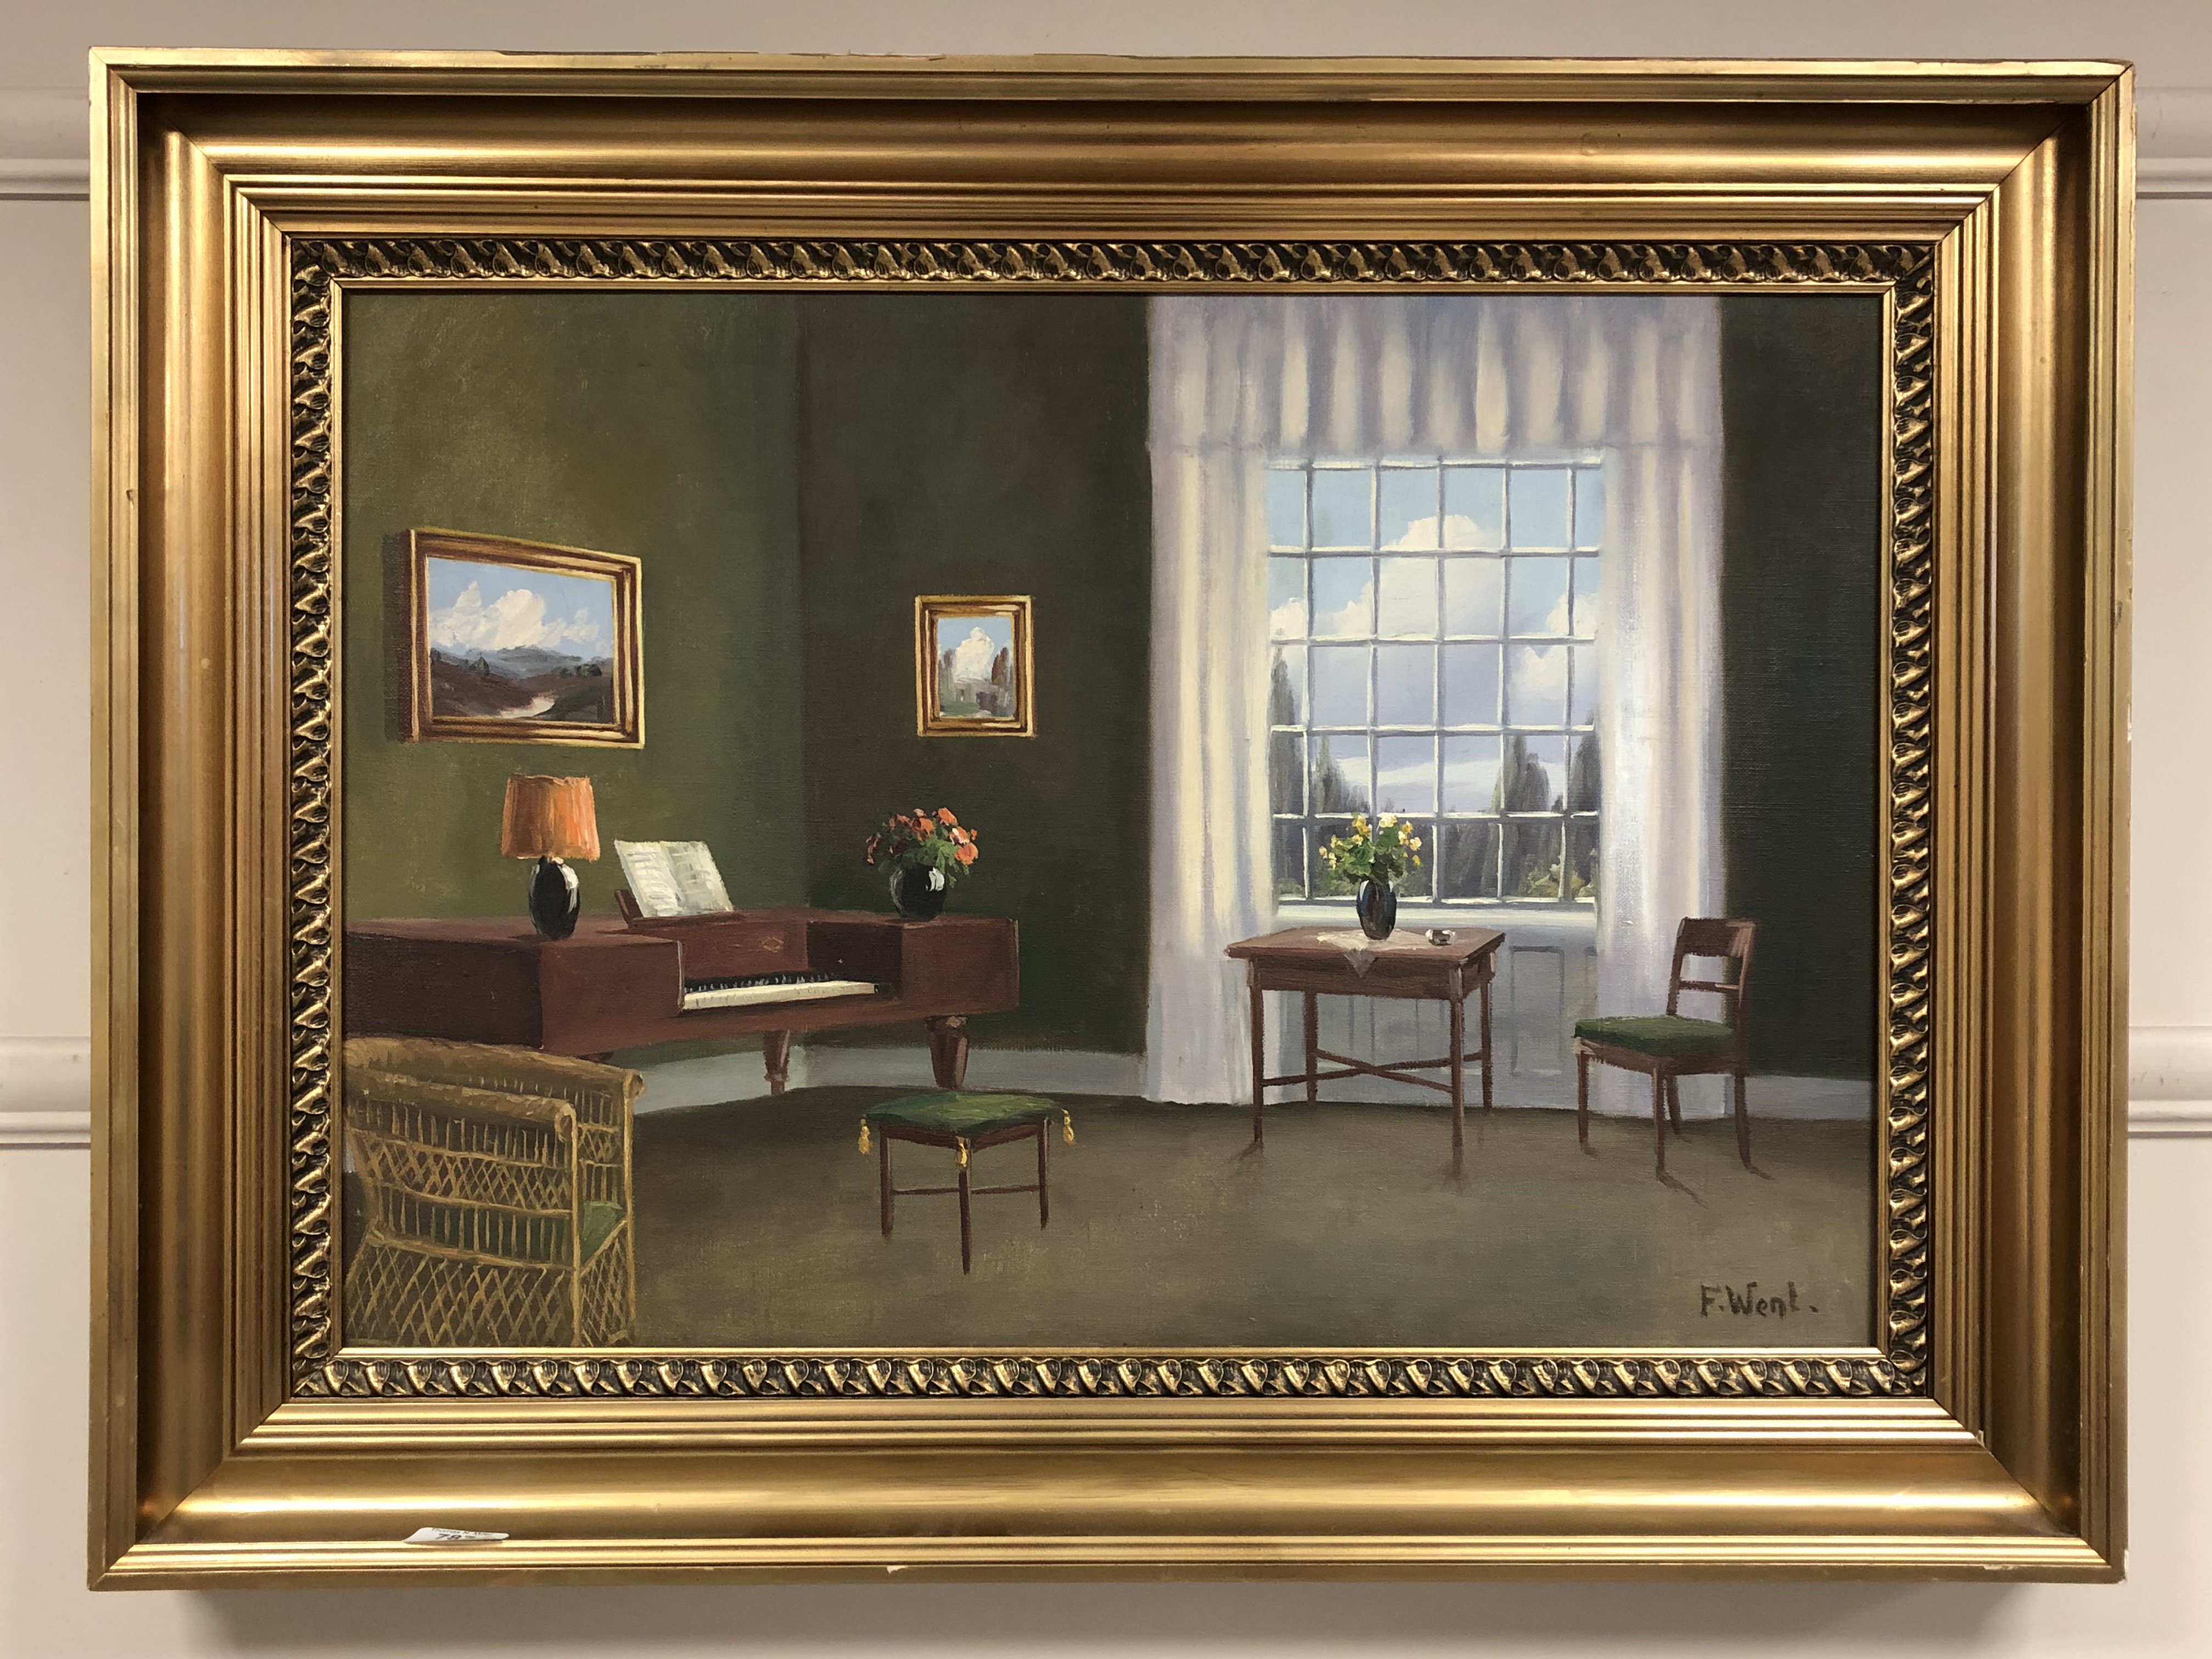 F Went : A drawing room interior, oil on canvas,